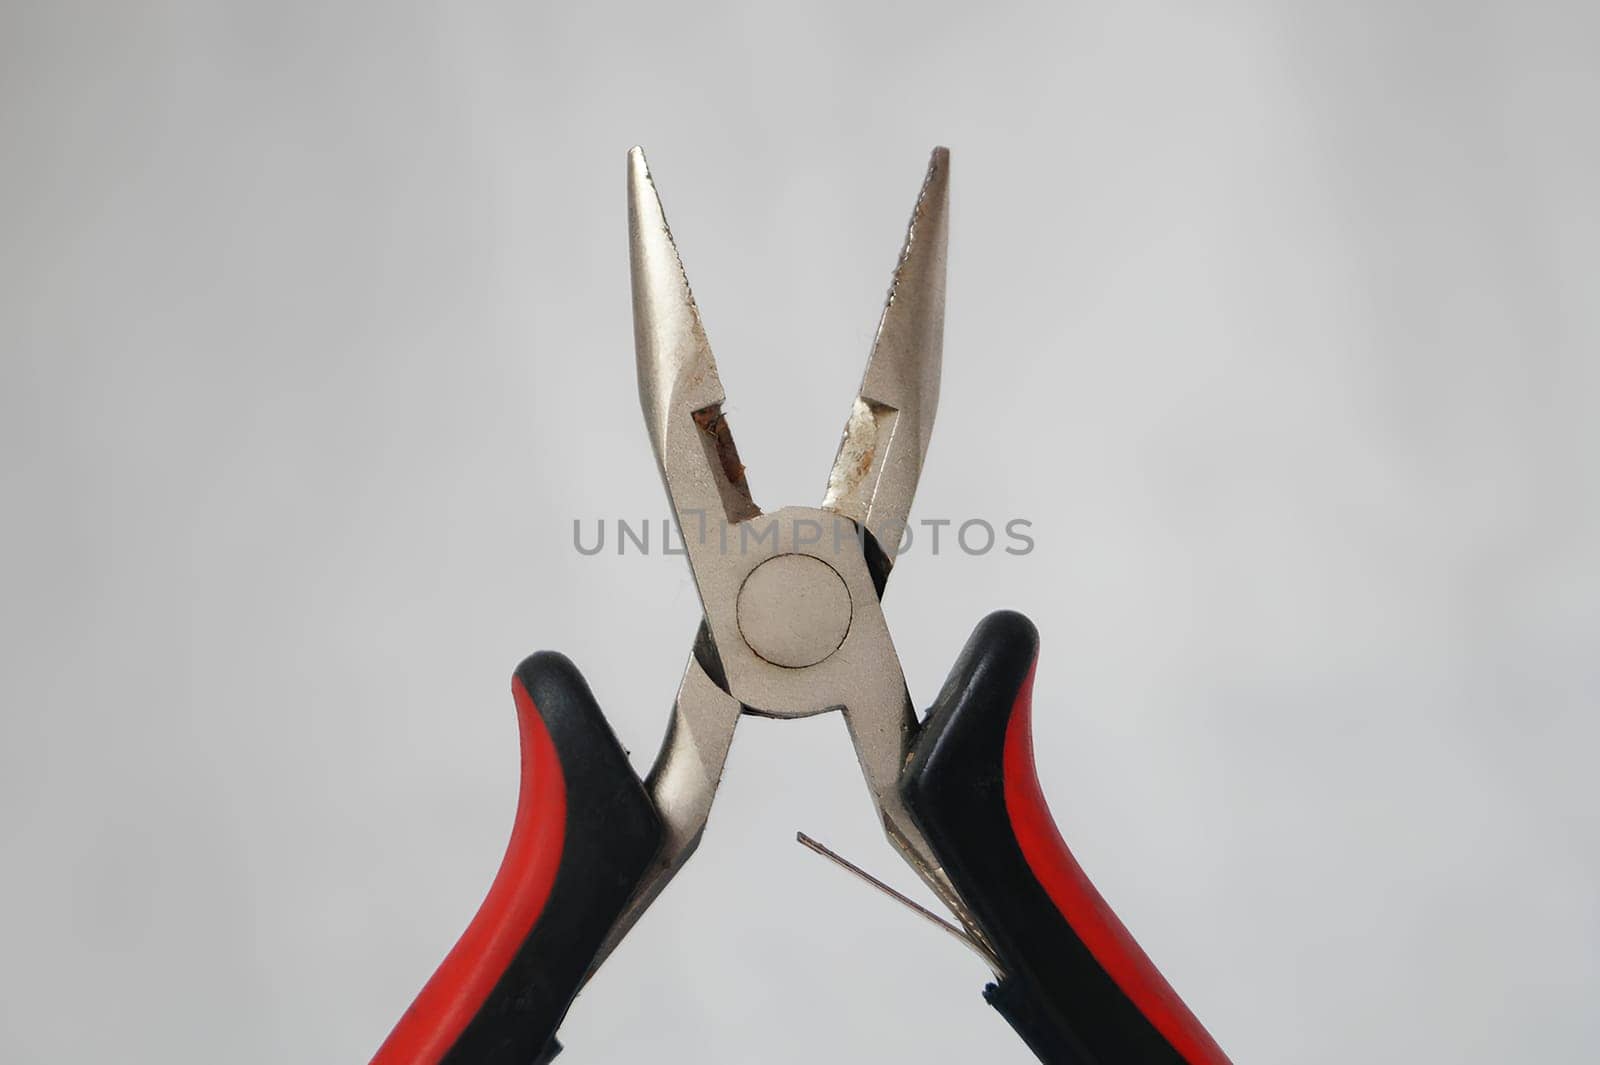 A pair of pliers with a red handle and a black handle. High quality photo